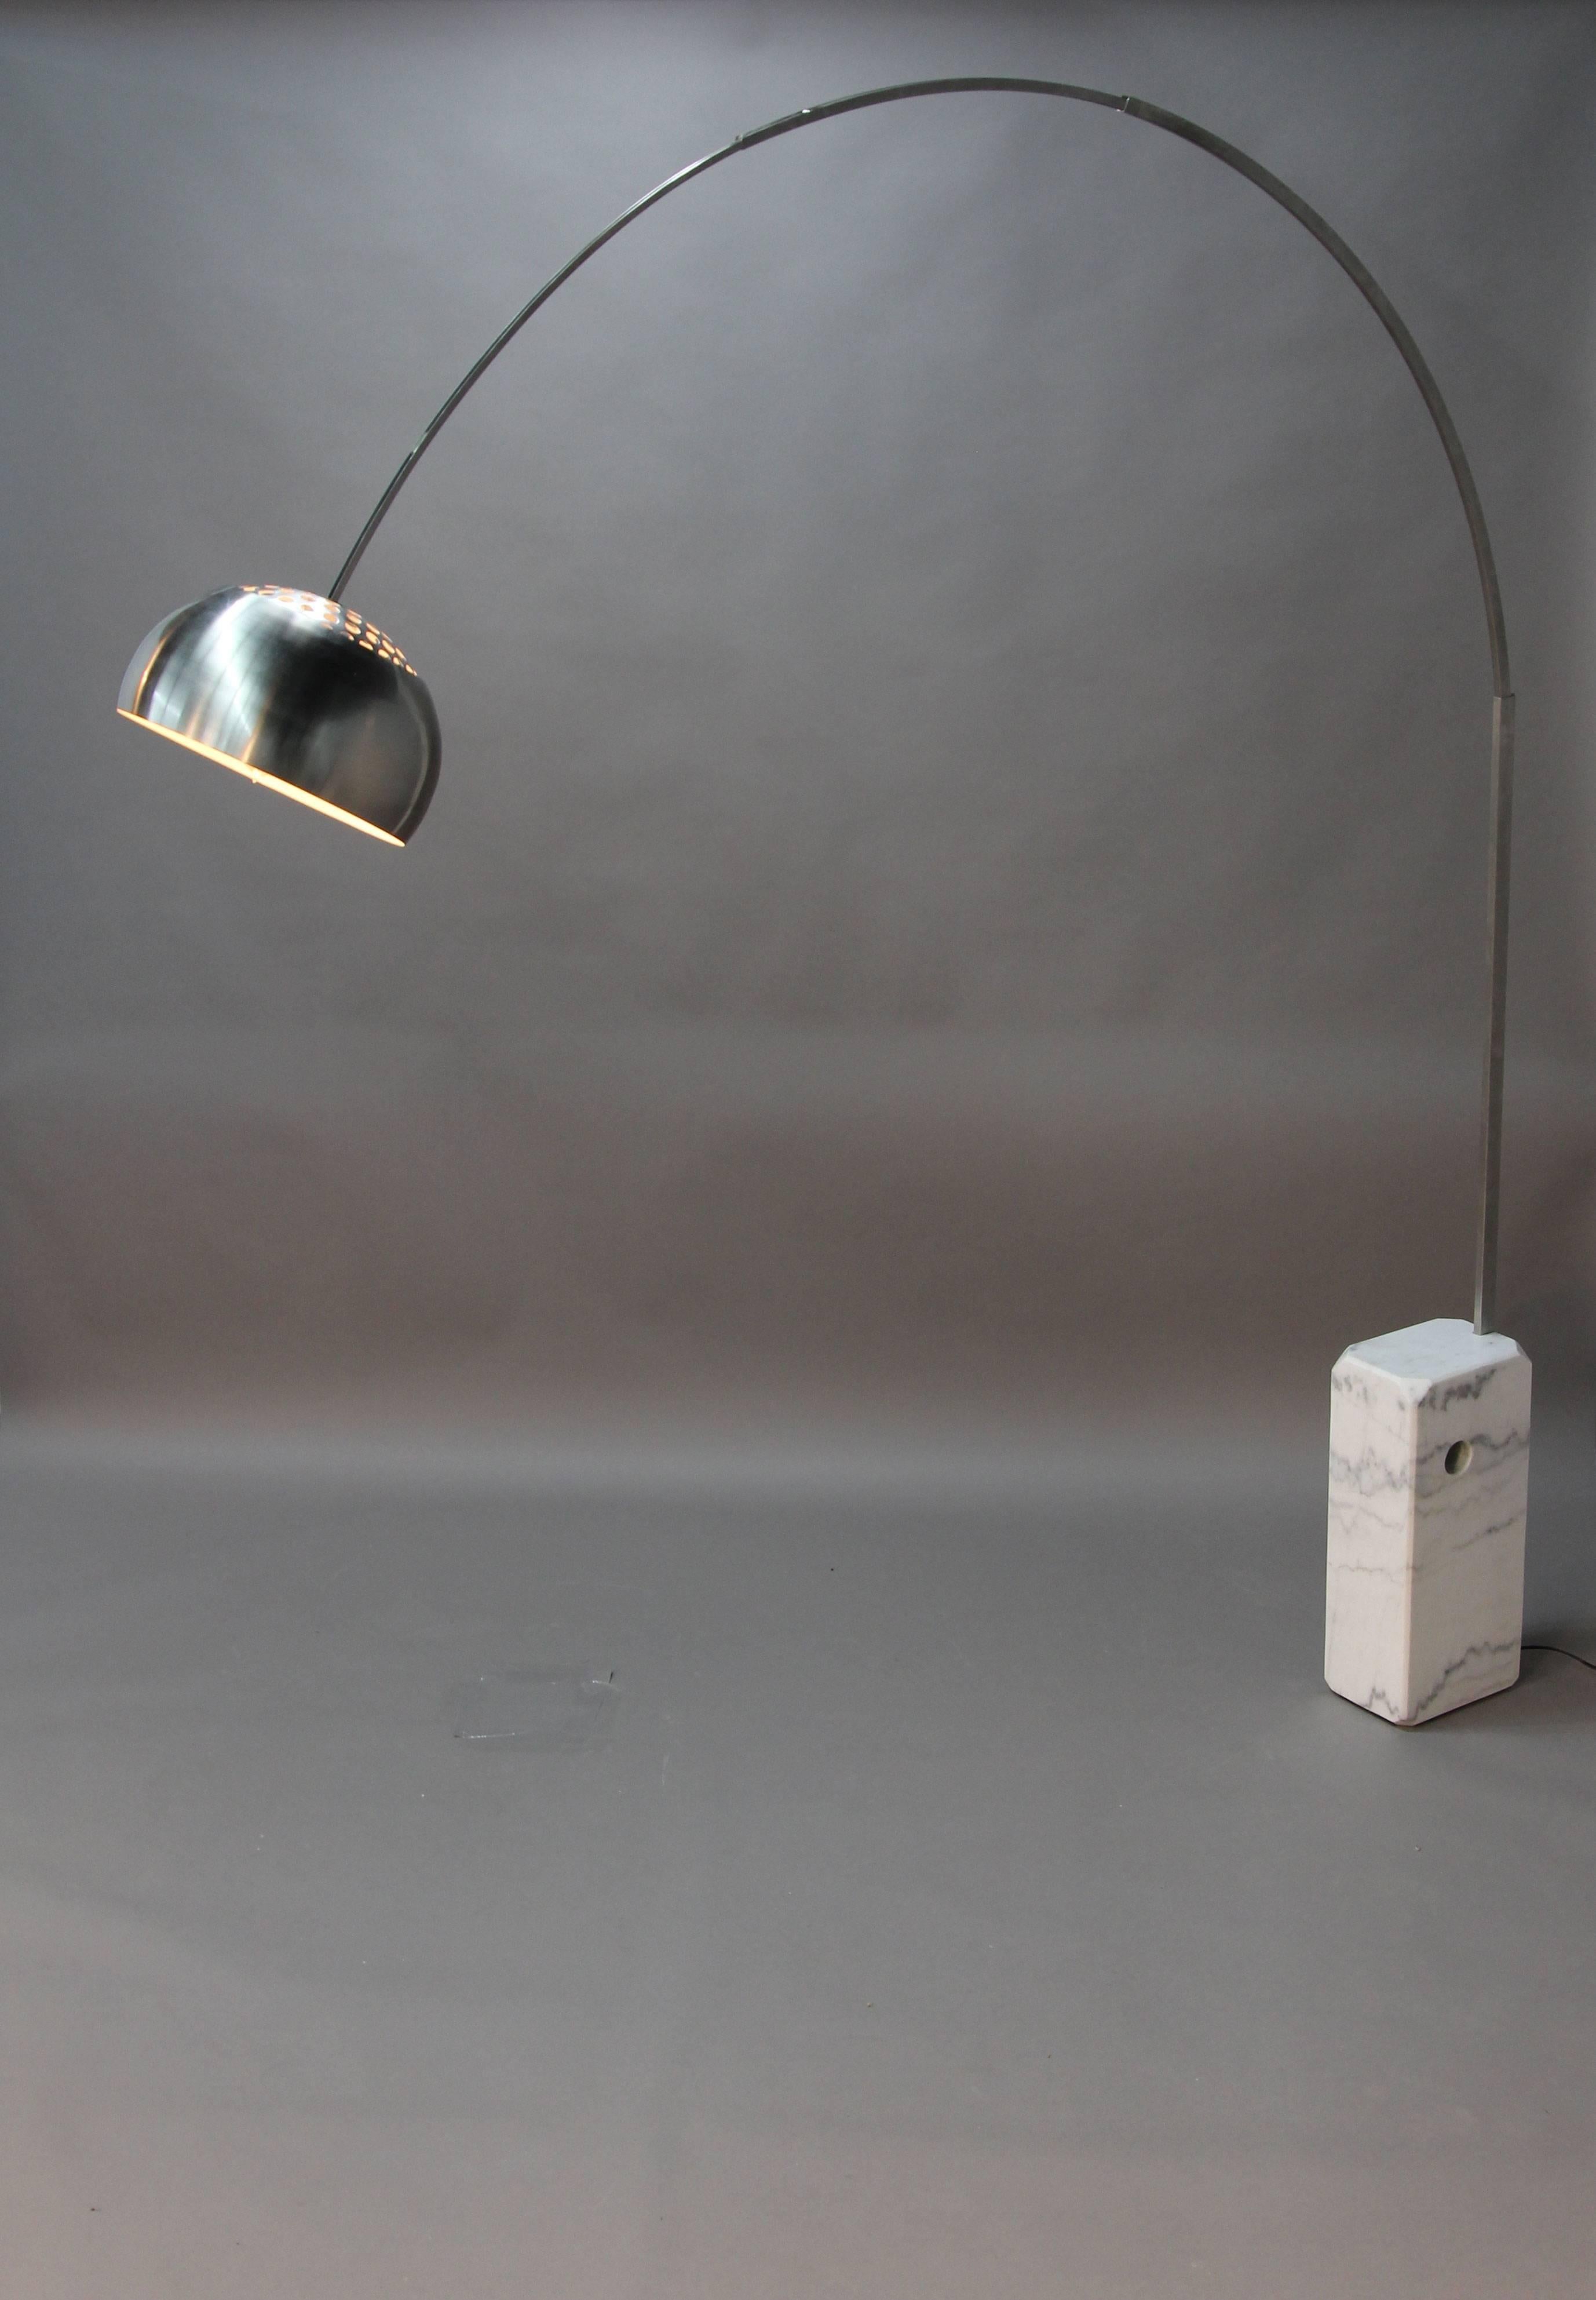 Marble base Achille & Pier Giacomo Castiglioni Arco lamp. With button foot switch, Carrera marble base.